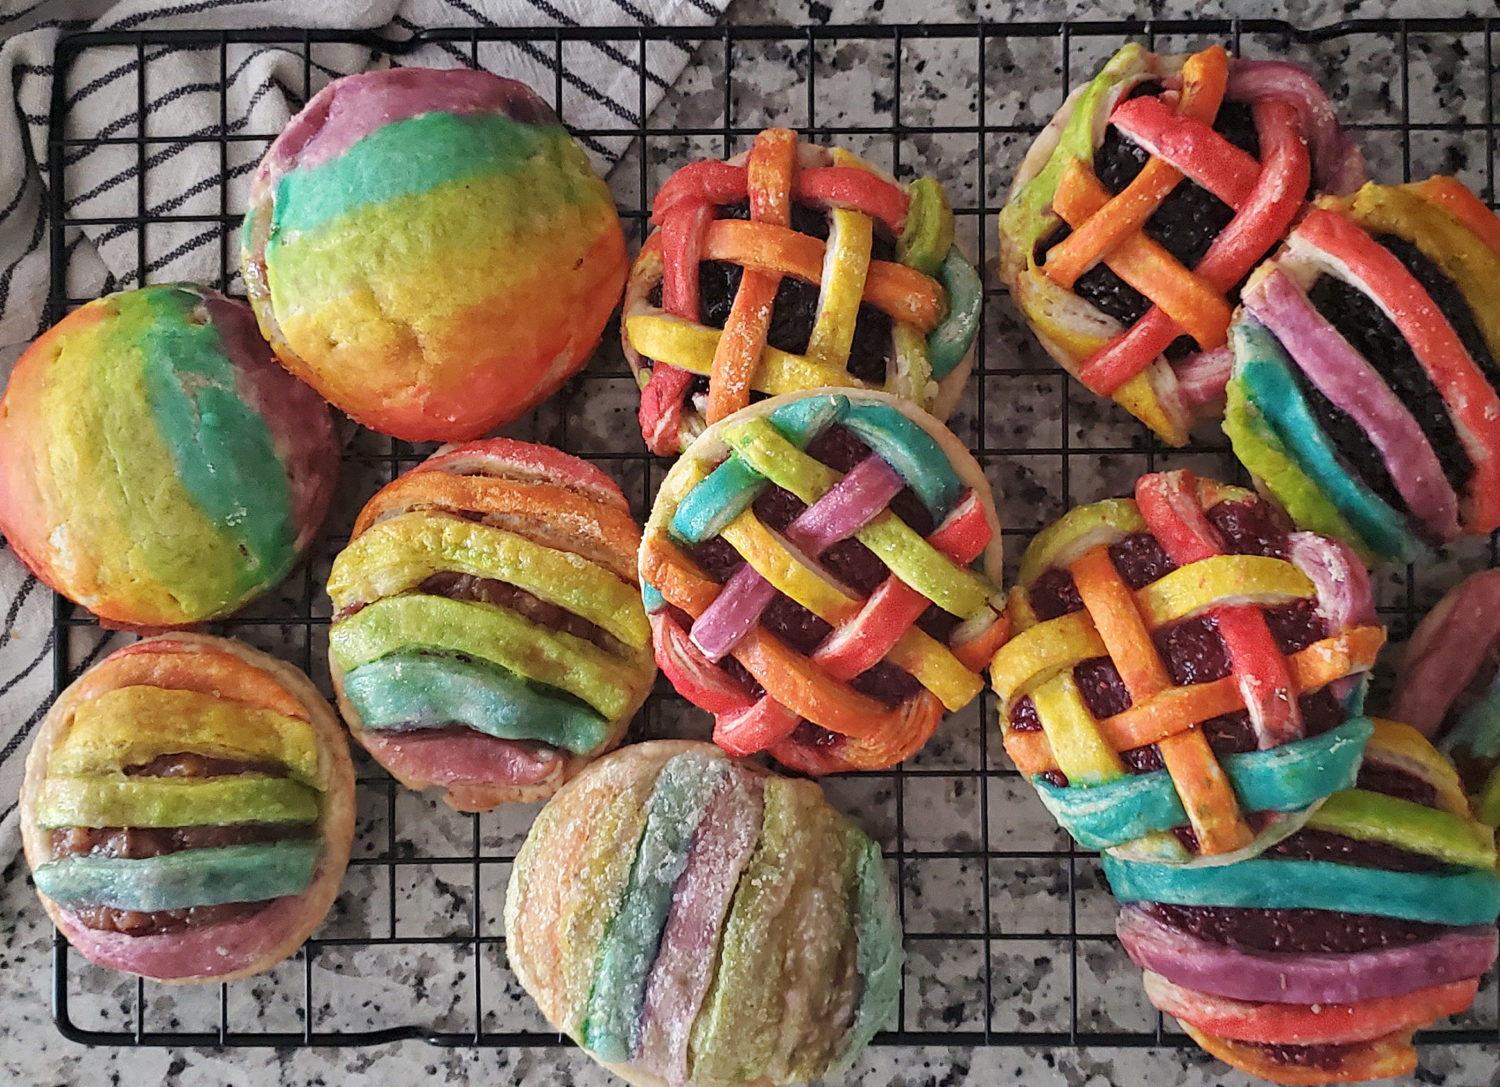 Celebrate your love & pride with Rainbow Hand Pies, fruit filling of your choice, fun and creativity in the kitchen awaits!